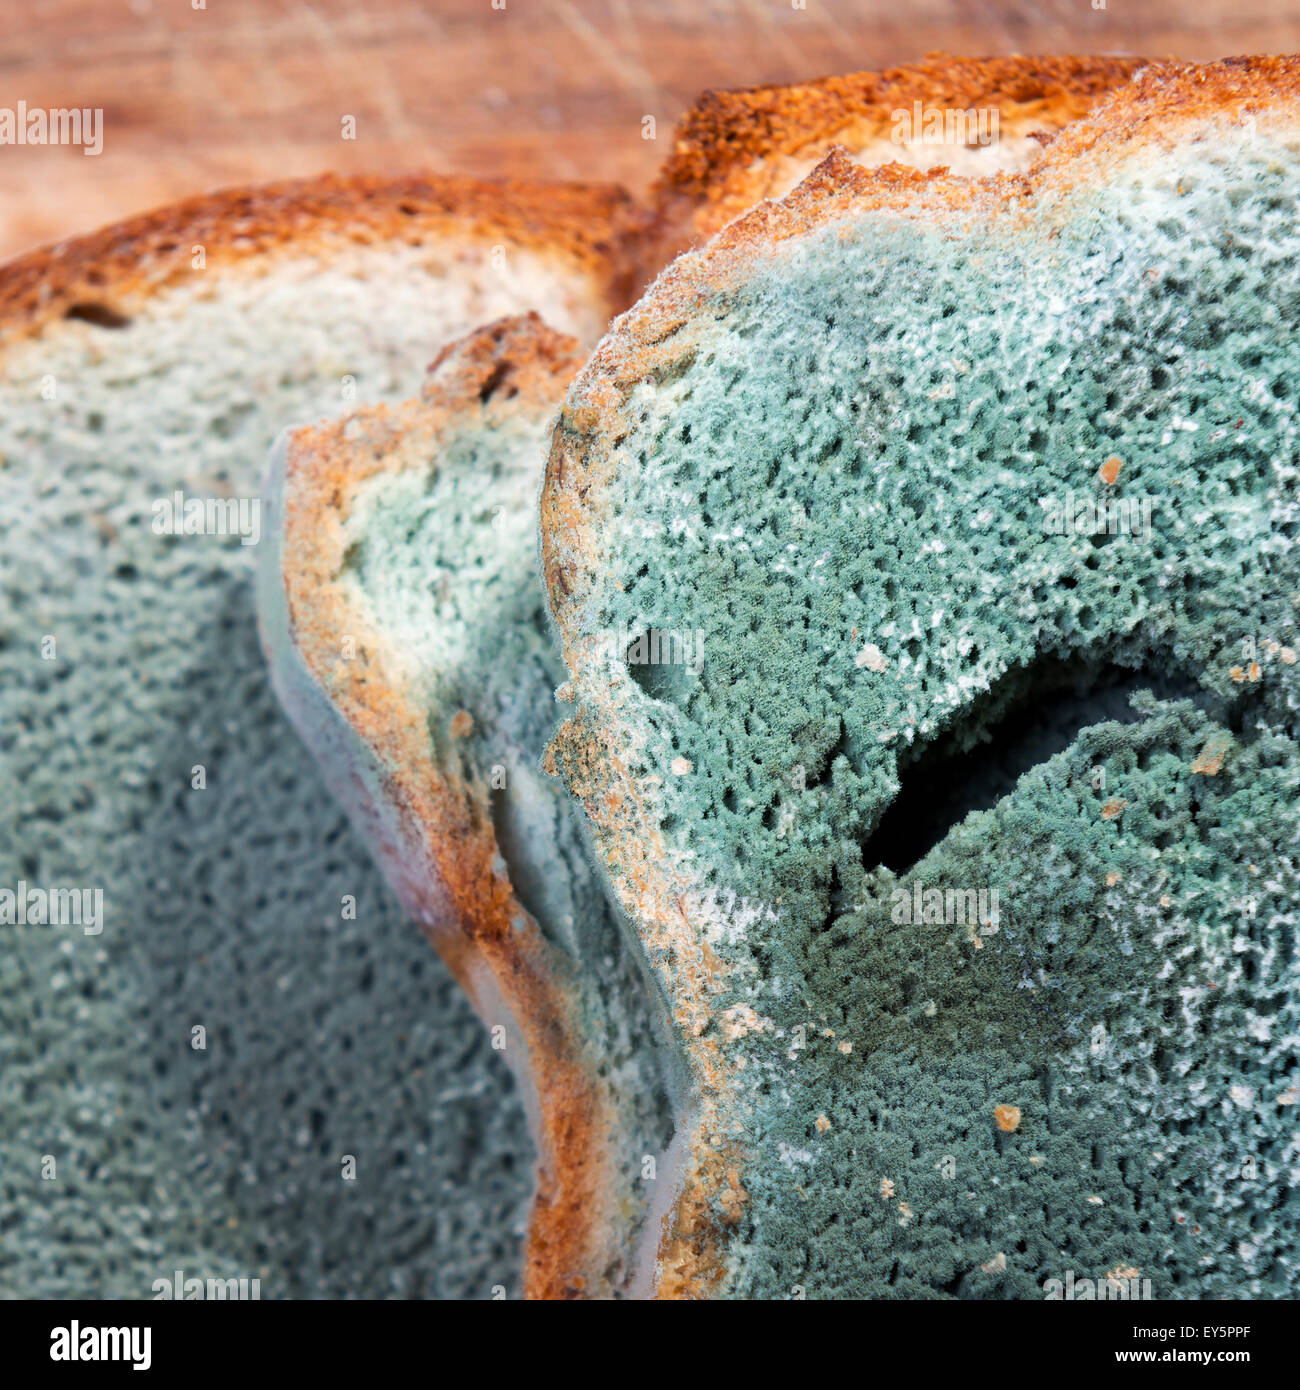 https://c8.alamy.com/comp/EY5PPF/mold-growing-rapidly-on-moldy-bread-in-green-and-white-spores-EY5PPF.jpg